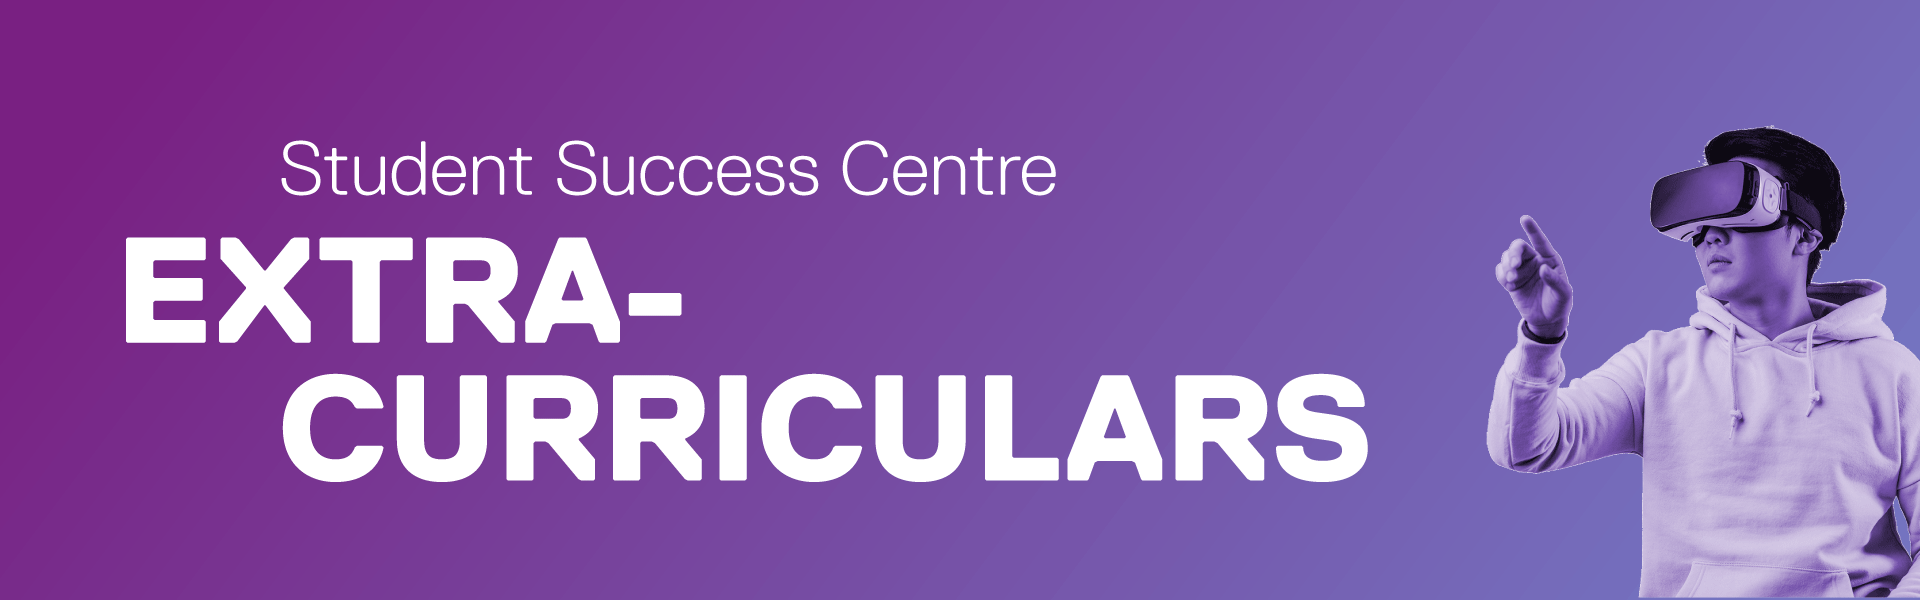 Student Success Centre Extra-Curriculars is written on a purple gradient with a person using a VR headset on the right